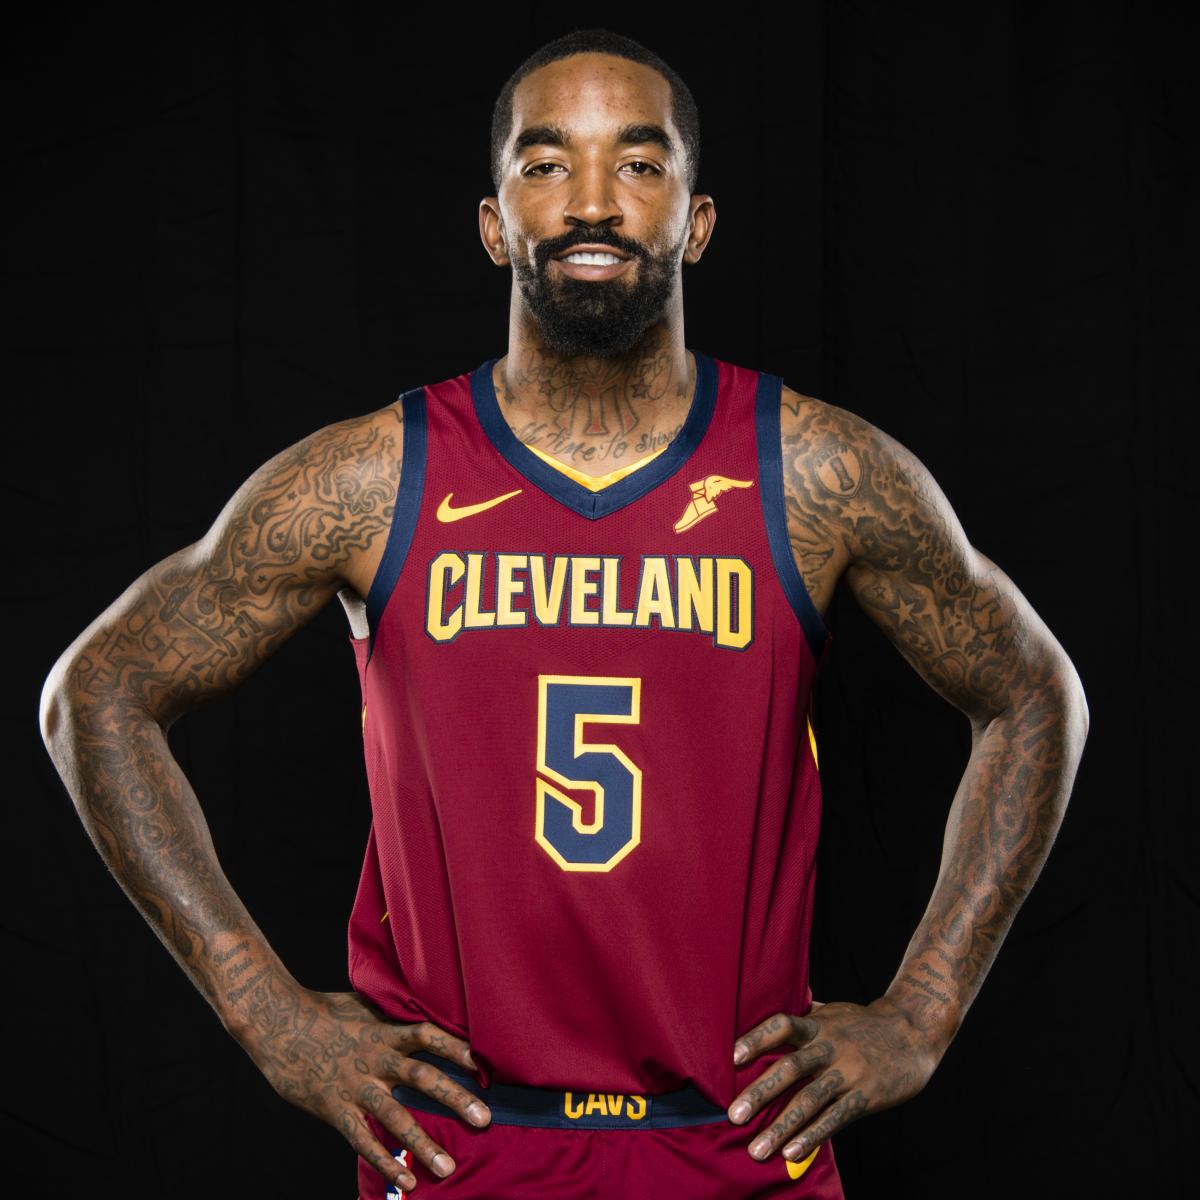 Jr Smith Jersey for sale